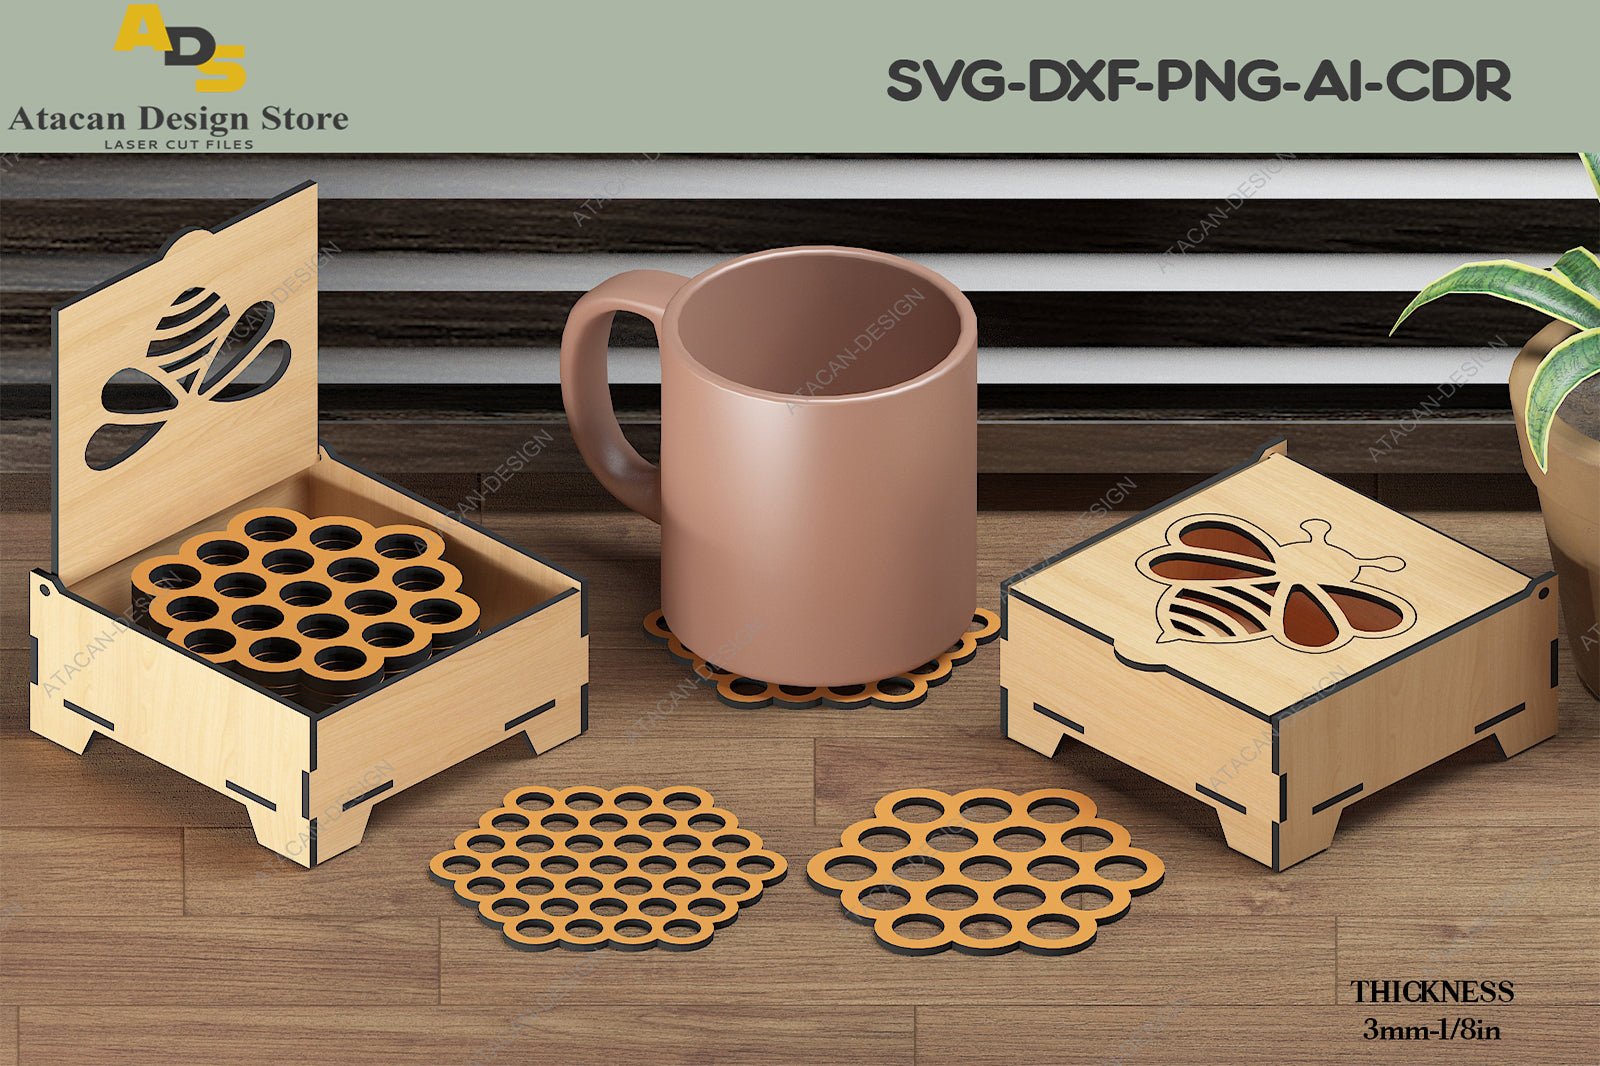 Honey Bee Coasters and Box / Honeycomb Hexagon Coaster / Geometric Laser Pattern SVG DXF CDR Ai 305